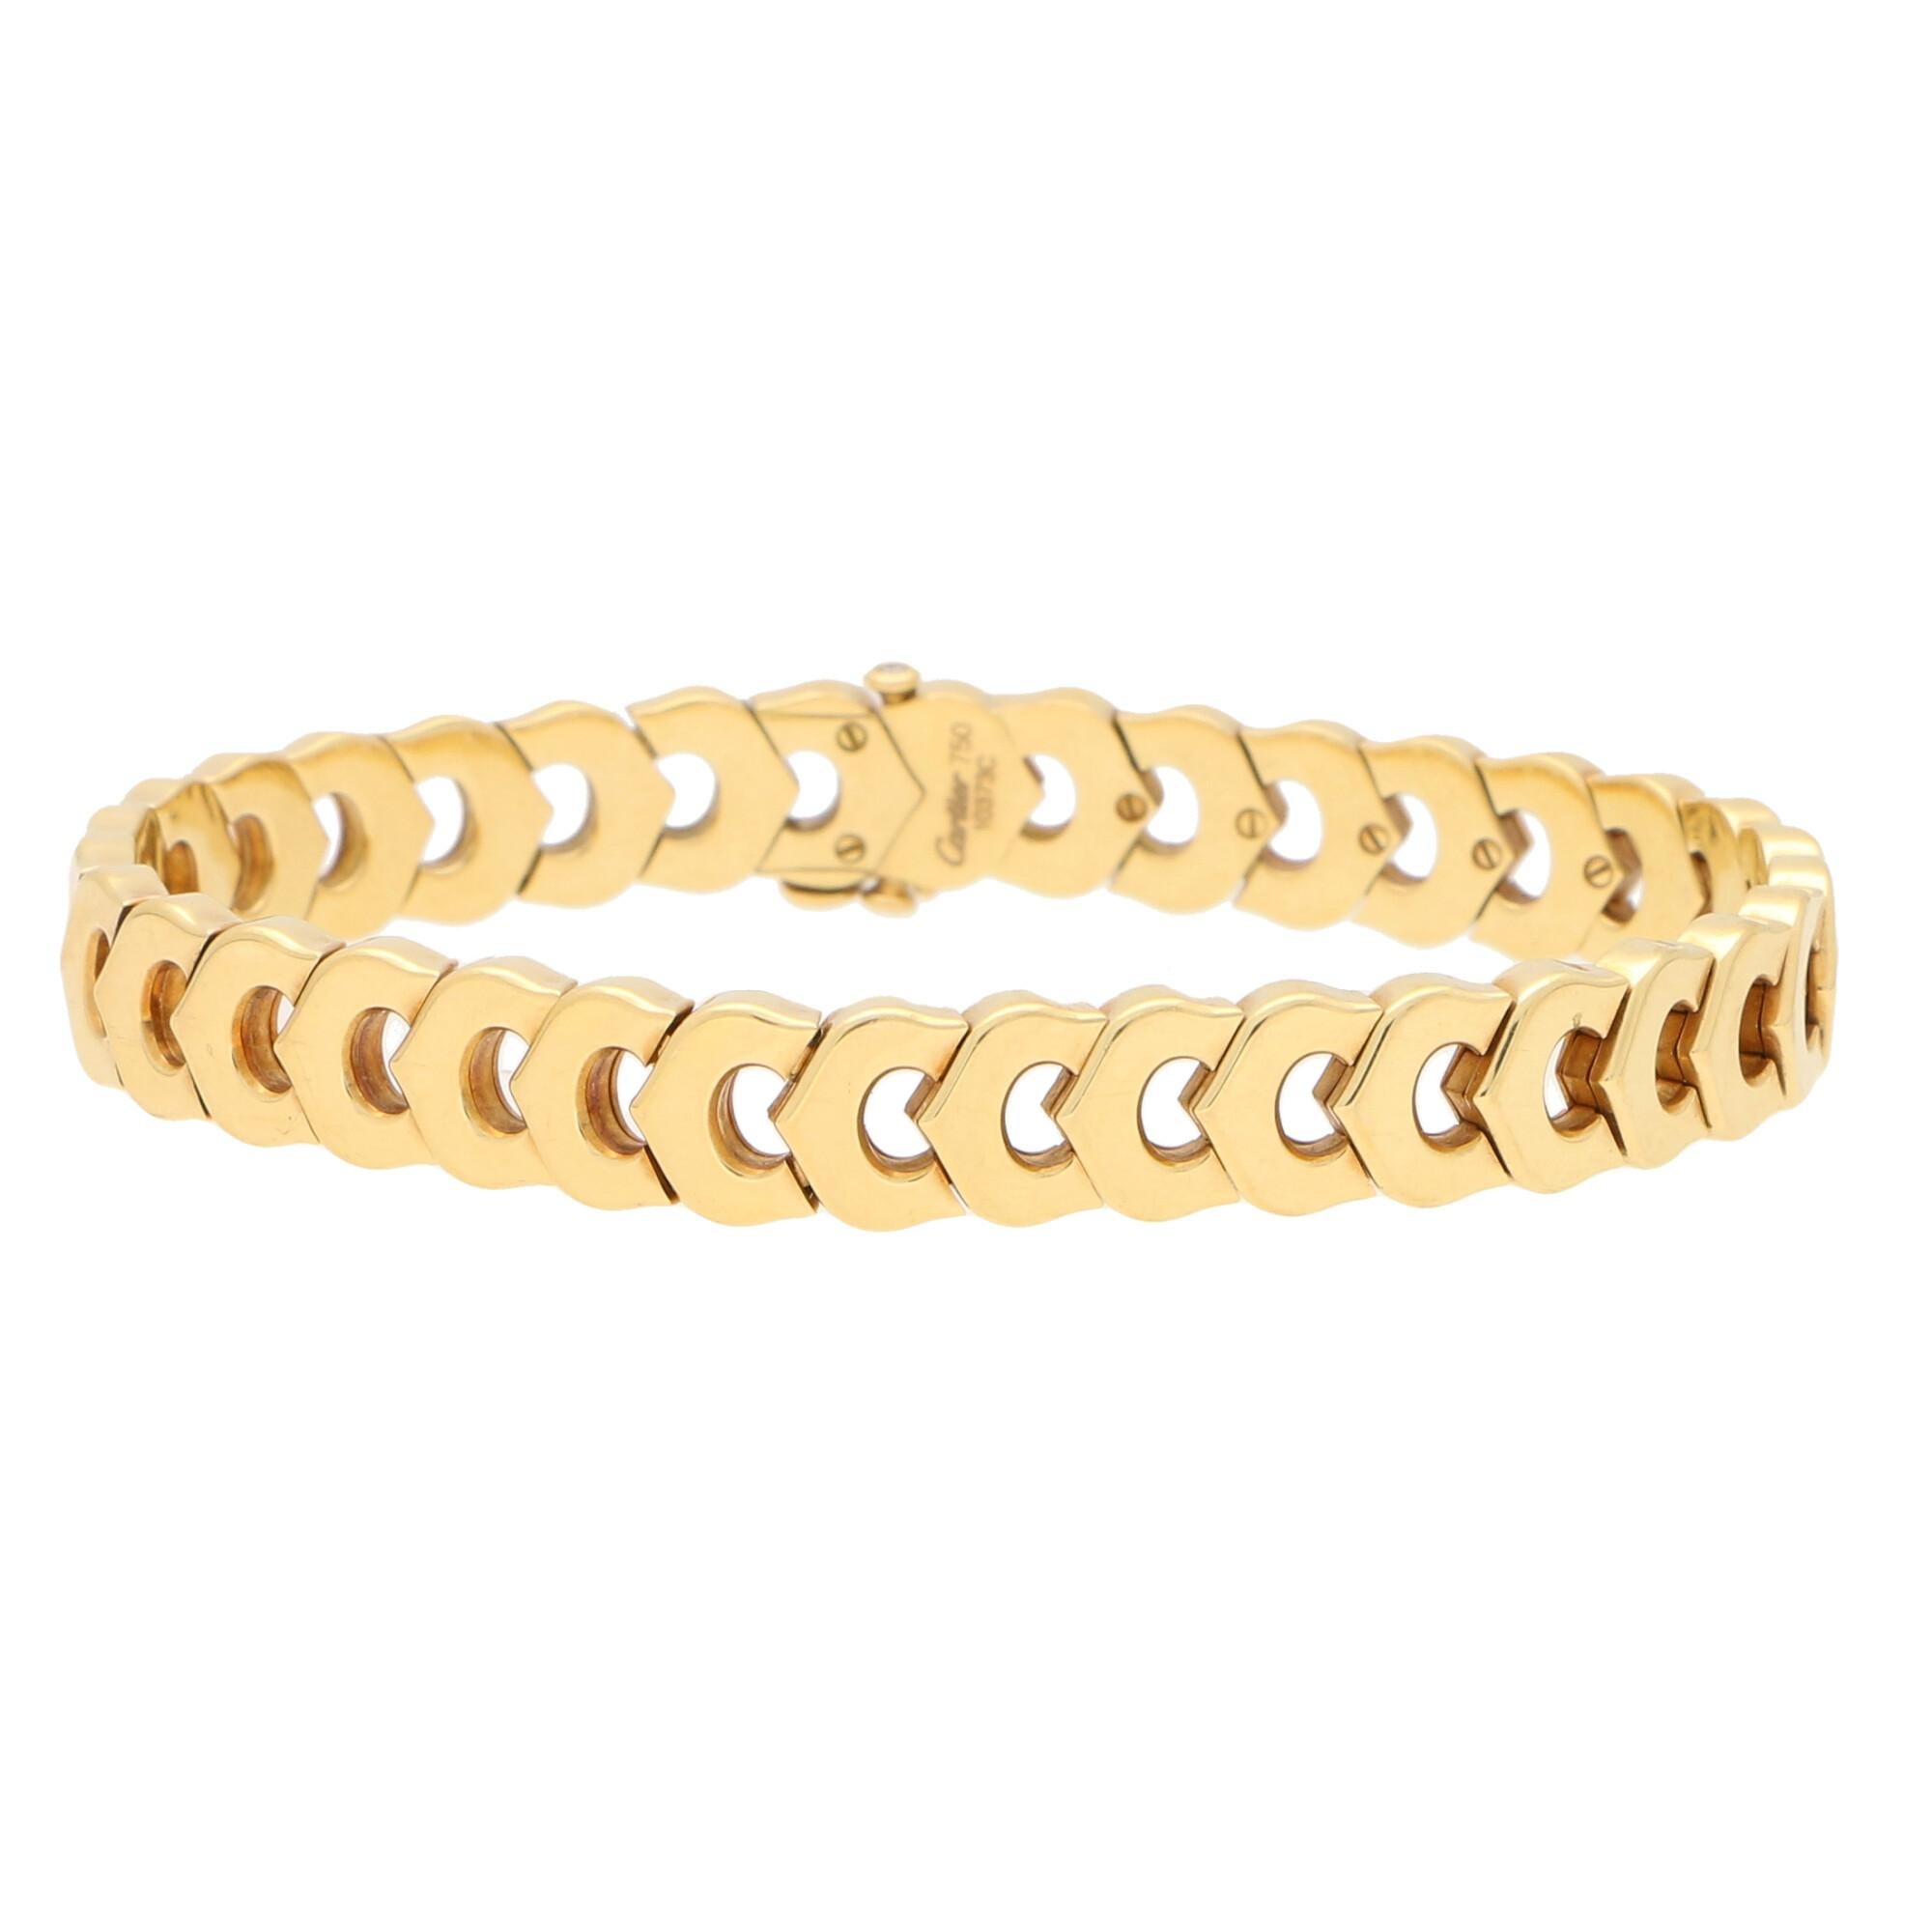 A beautiful C de Cartier link bracelet made of solid 18k yellow gold 

The bracelet is composed of exactly 35 iconic Cartier C links and sits beautifully on the wrist. Due to the design of the bracelet it could easily be worn by itself as a stand